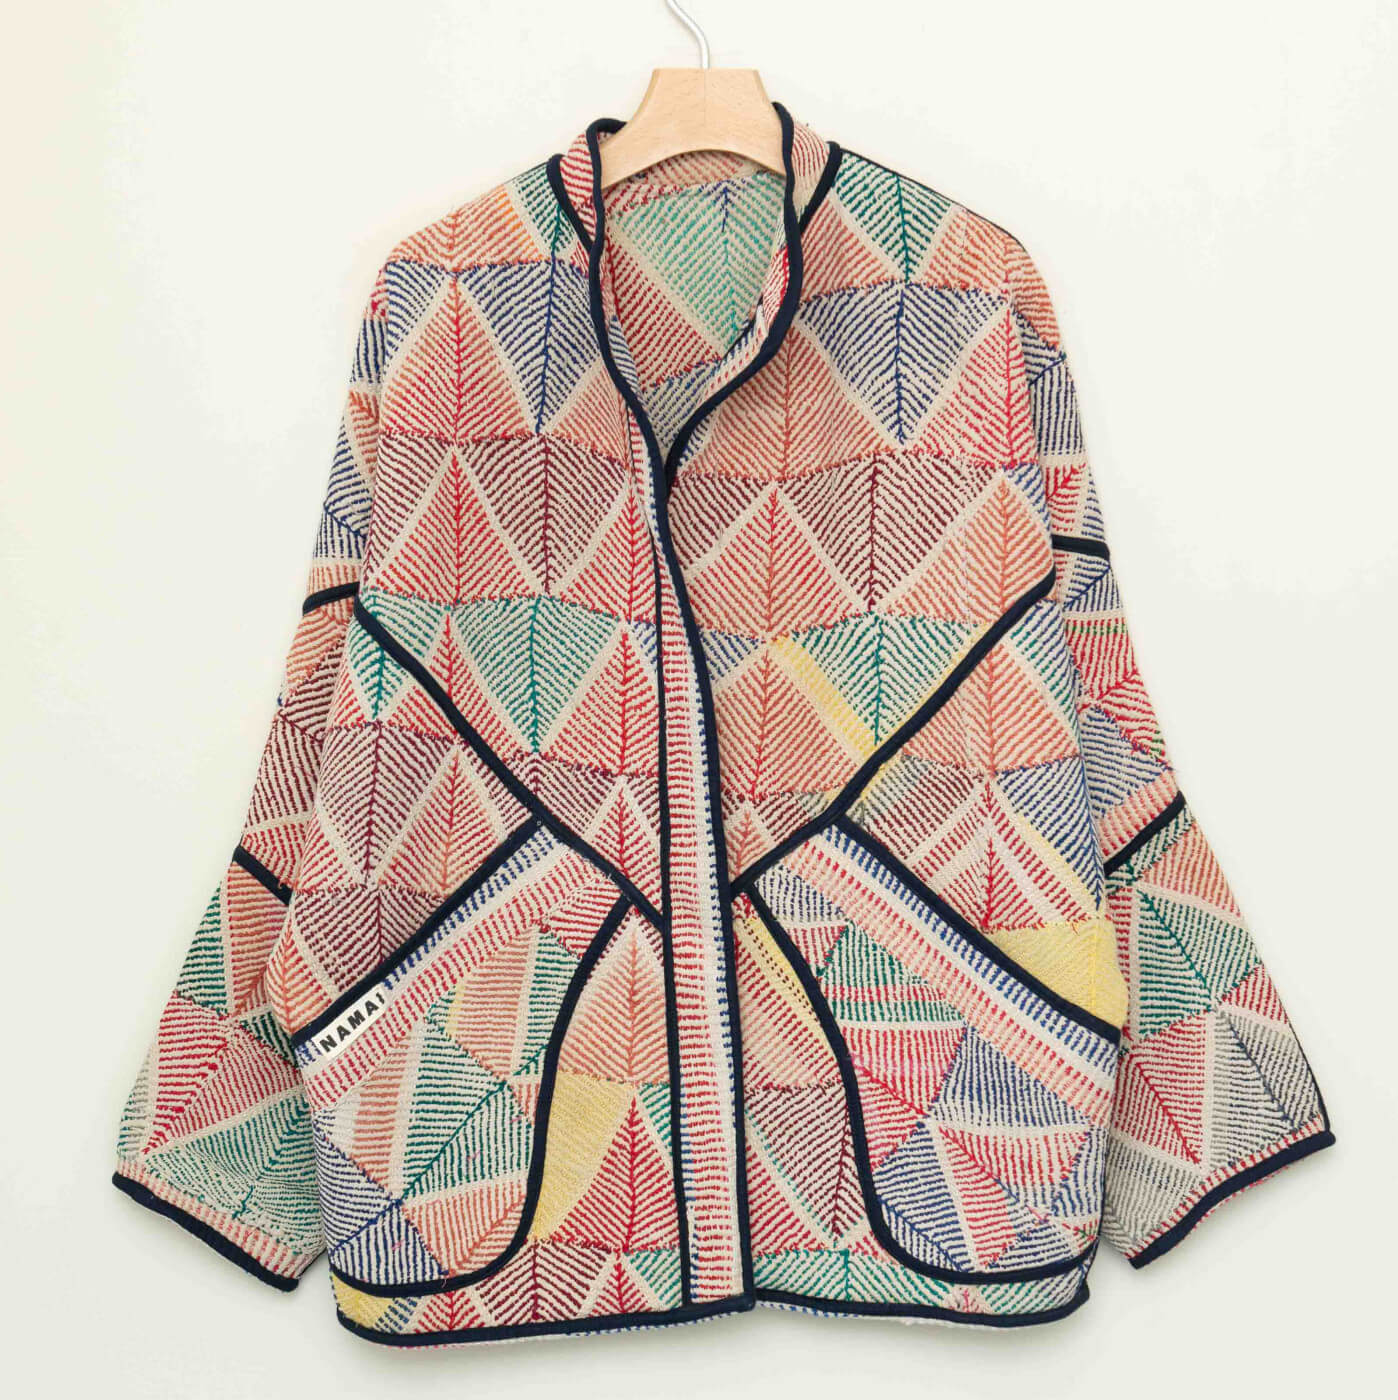 Discover the Beauty of the Naksha Kantha Quilted Jacket